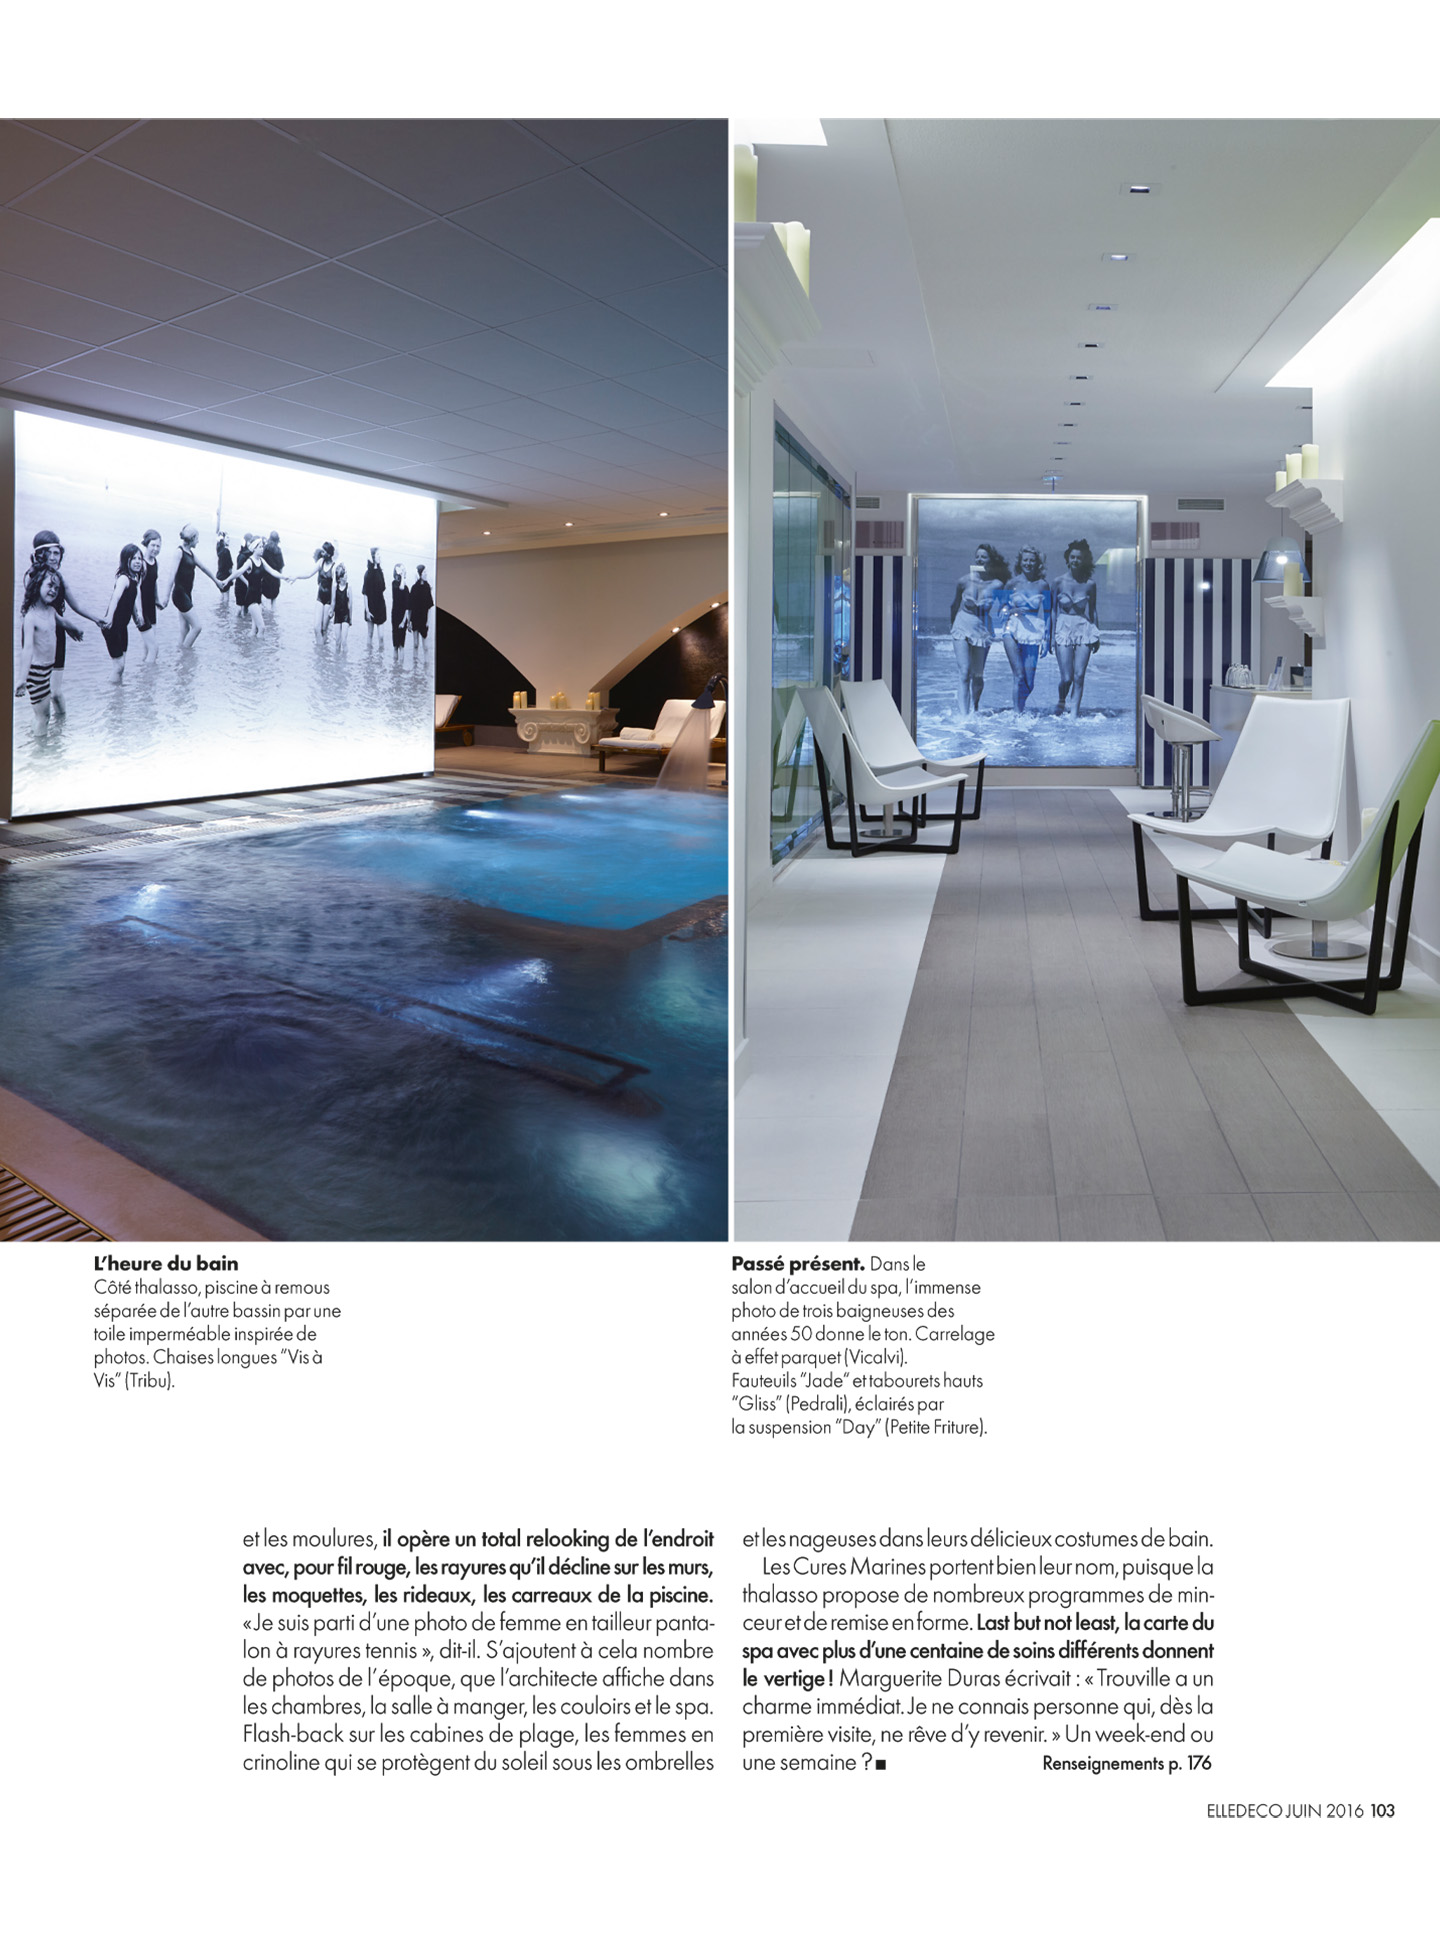 article on the marine cures of trouville realized by the interior design studio jean-philippe nuel in the magazine elle decoration, 5 star hotel and spa